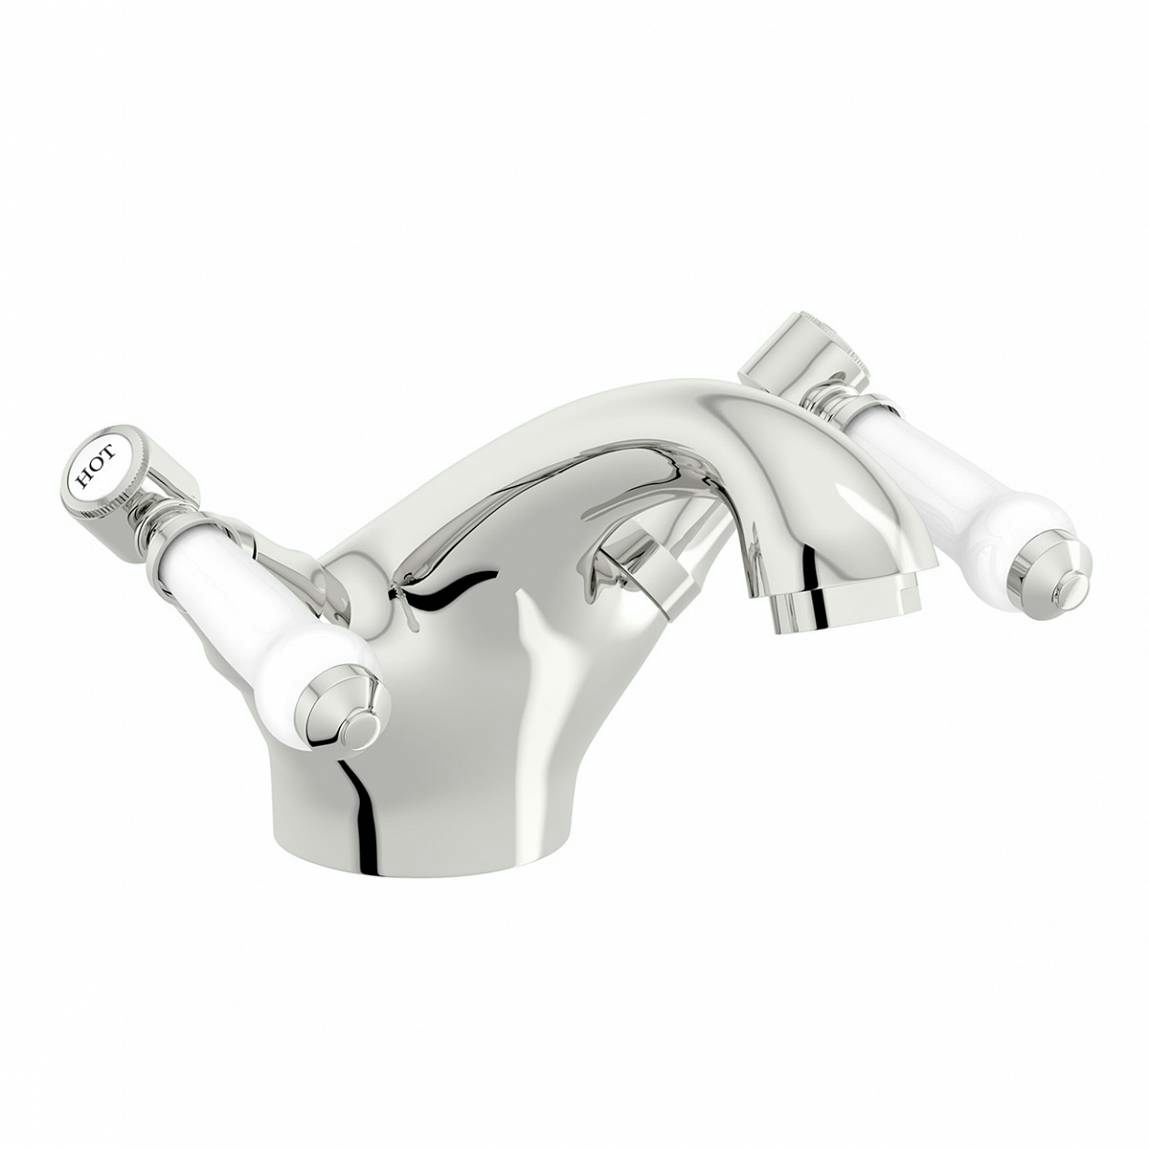 Orchard Winchester basin mixer tap with slotted waste